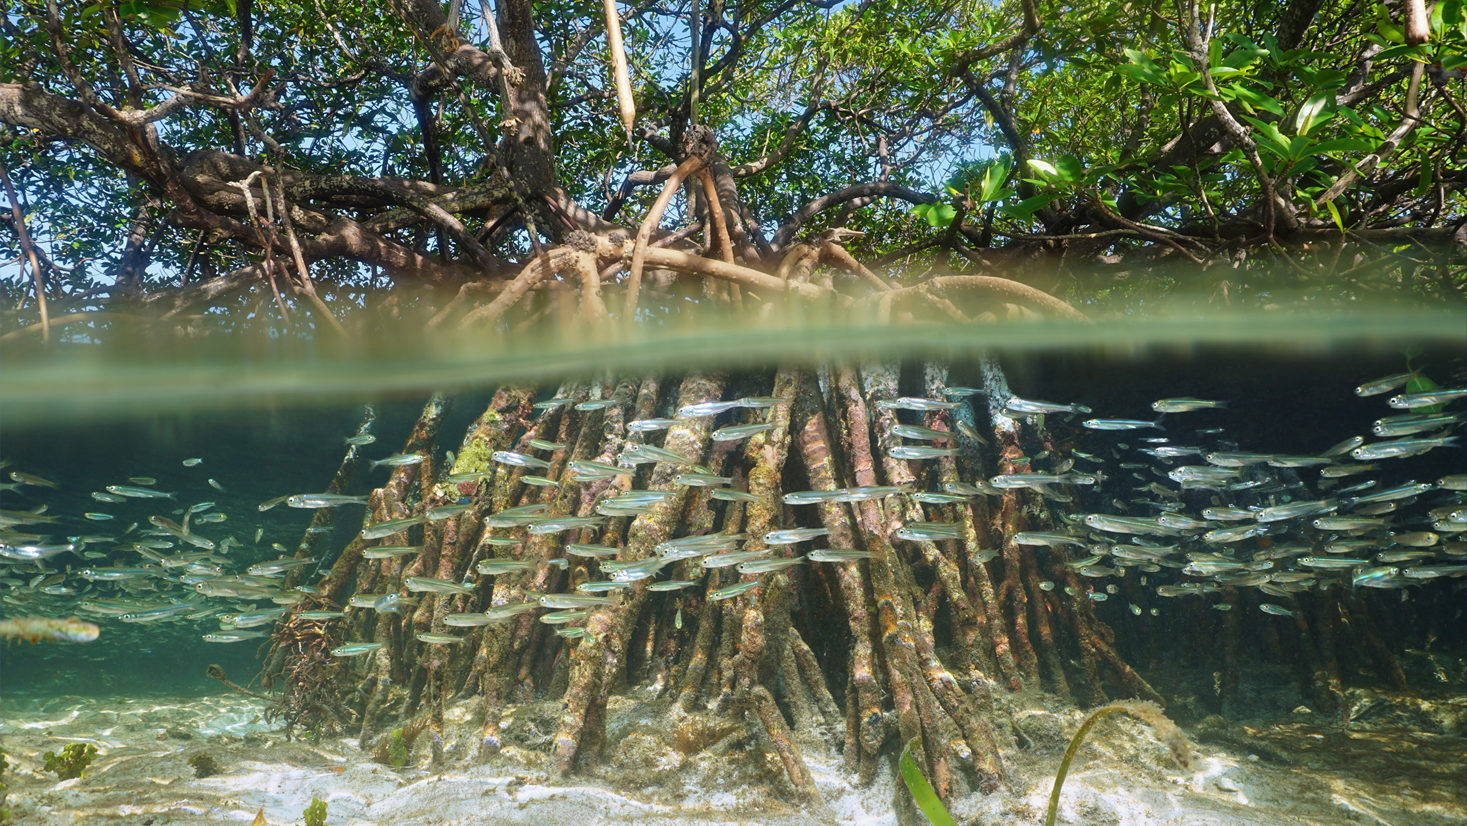 The dense roots of a mangrove host a school of fish near shore.